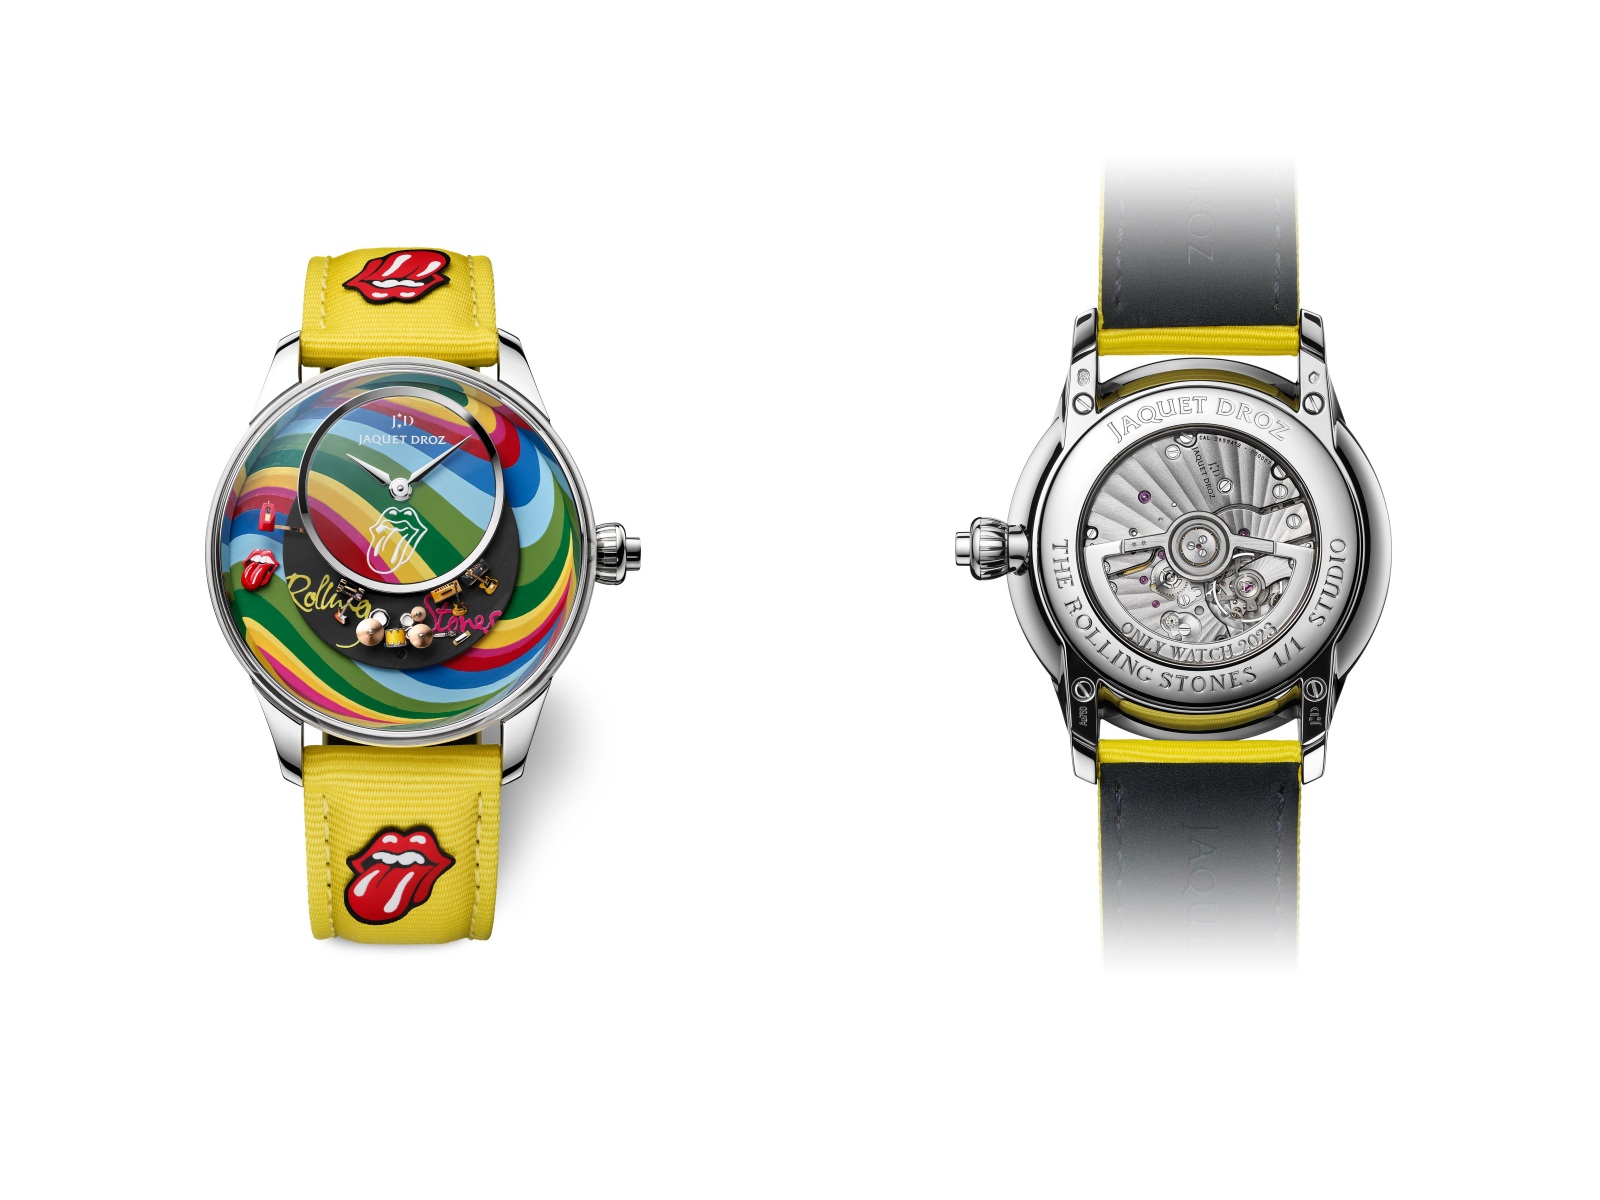 Jaquet Droz, The Rolling Stone 2023, Only Watch 2023, Rolling Stones Automaton, đồng hồ thụy sĩ